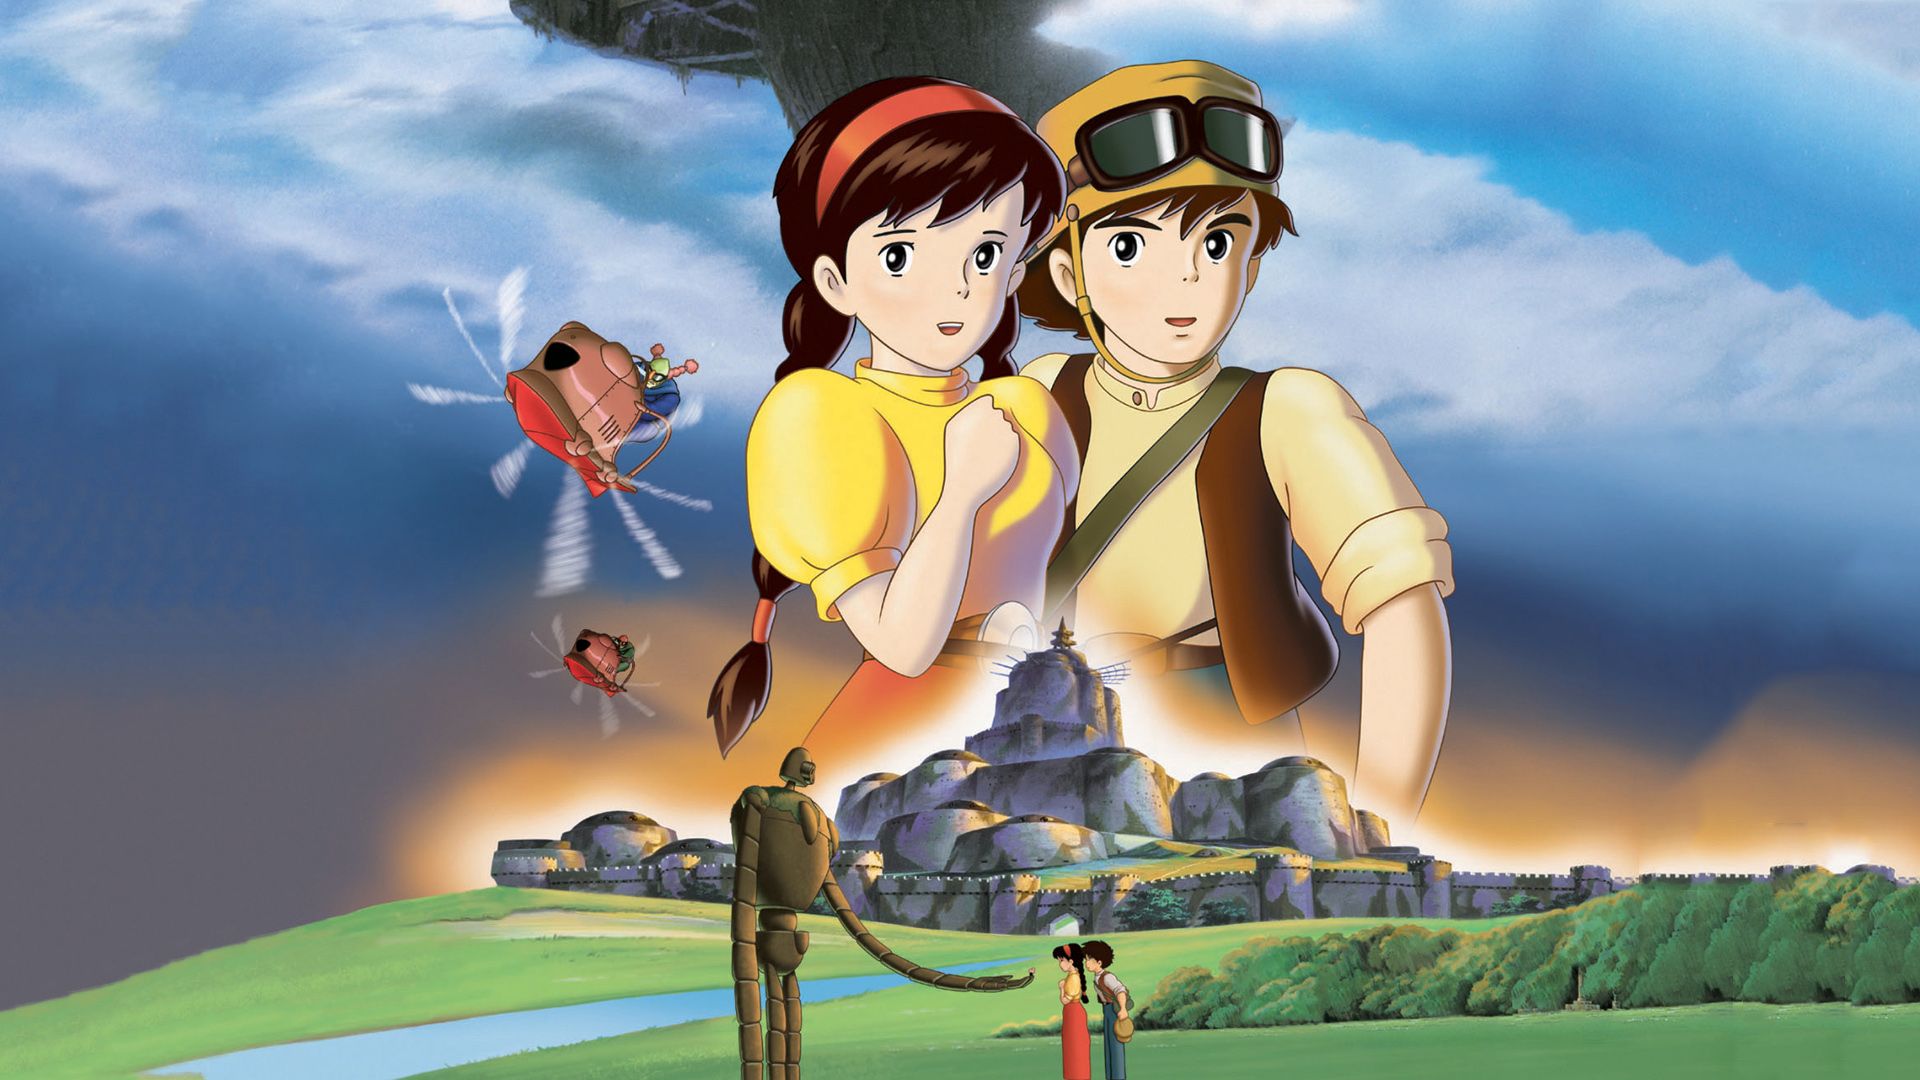 Castle in the Sky background